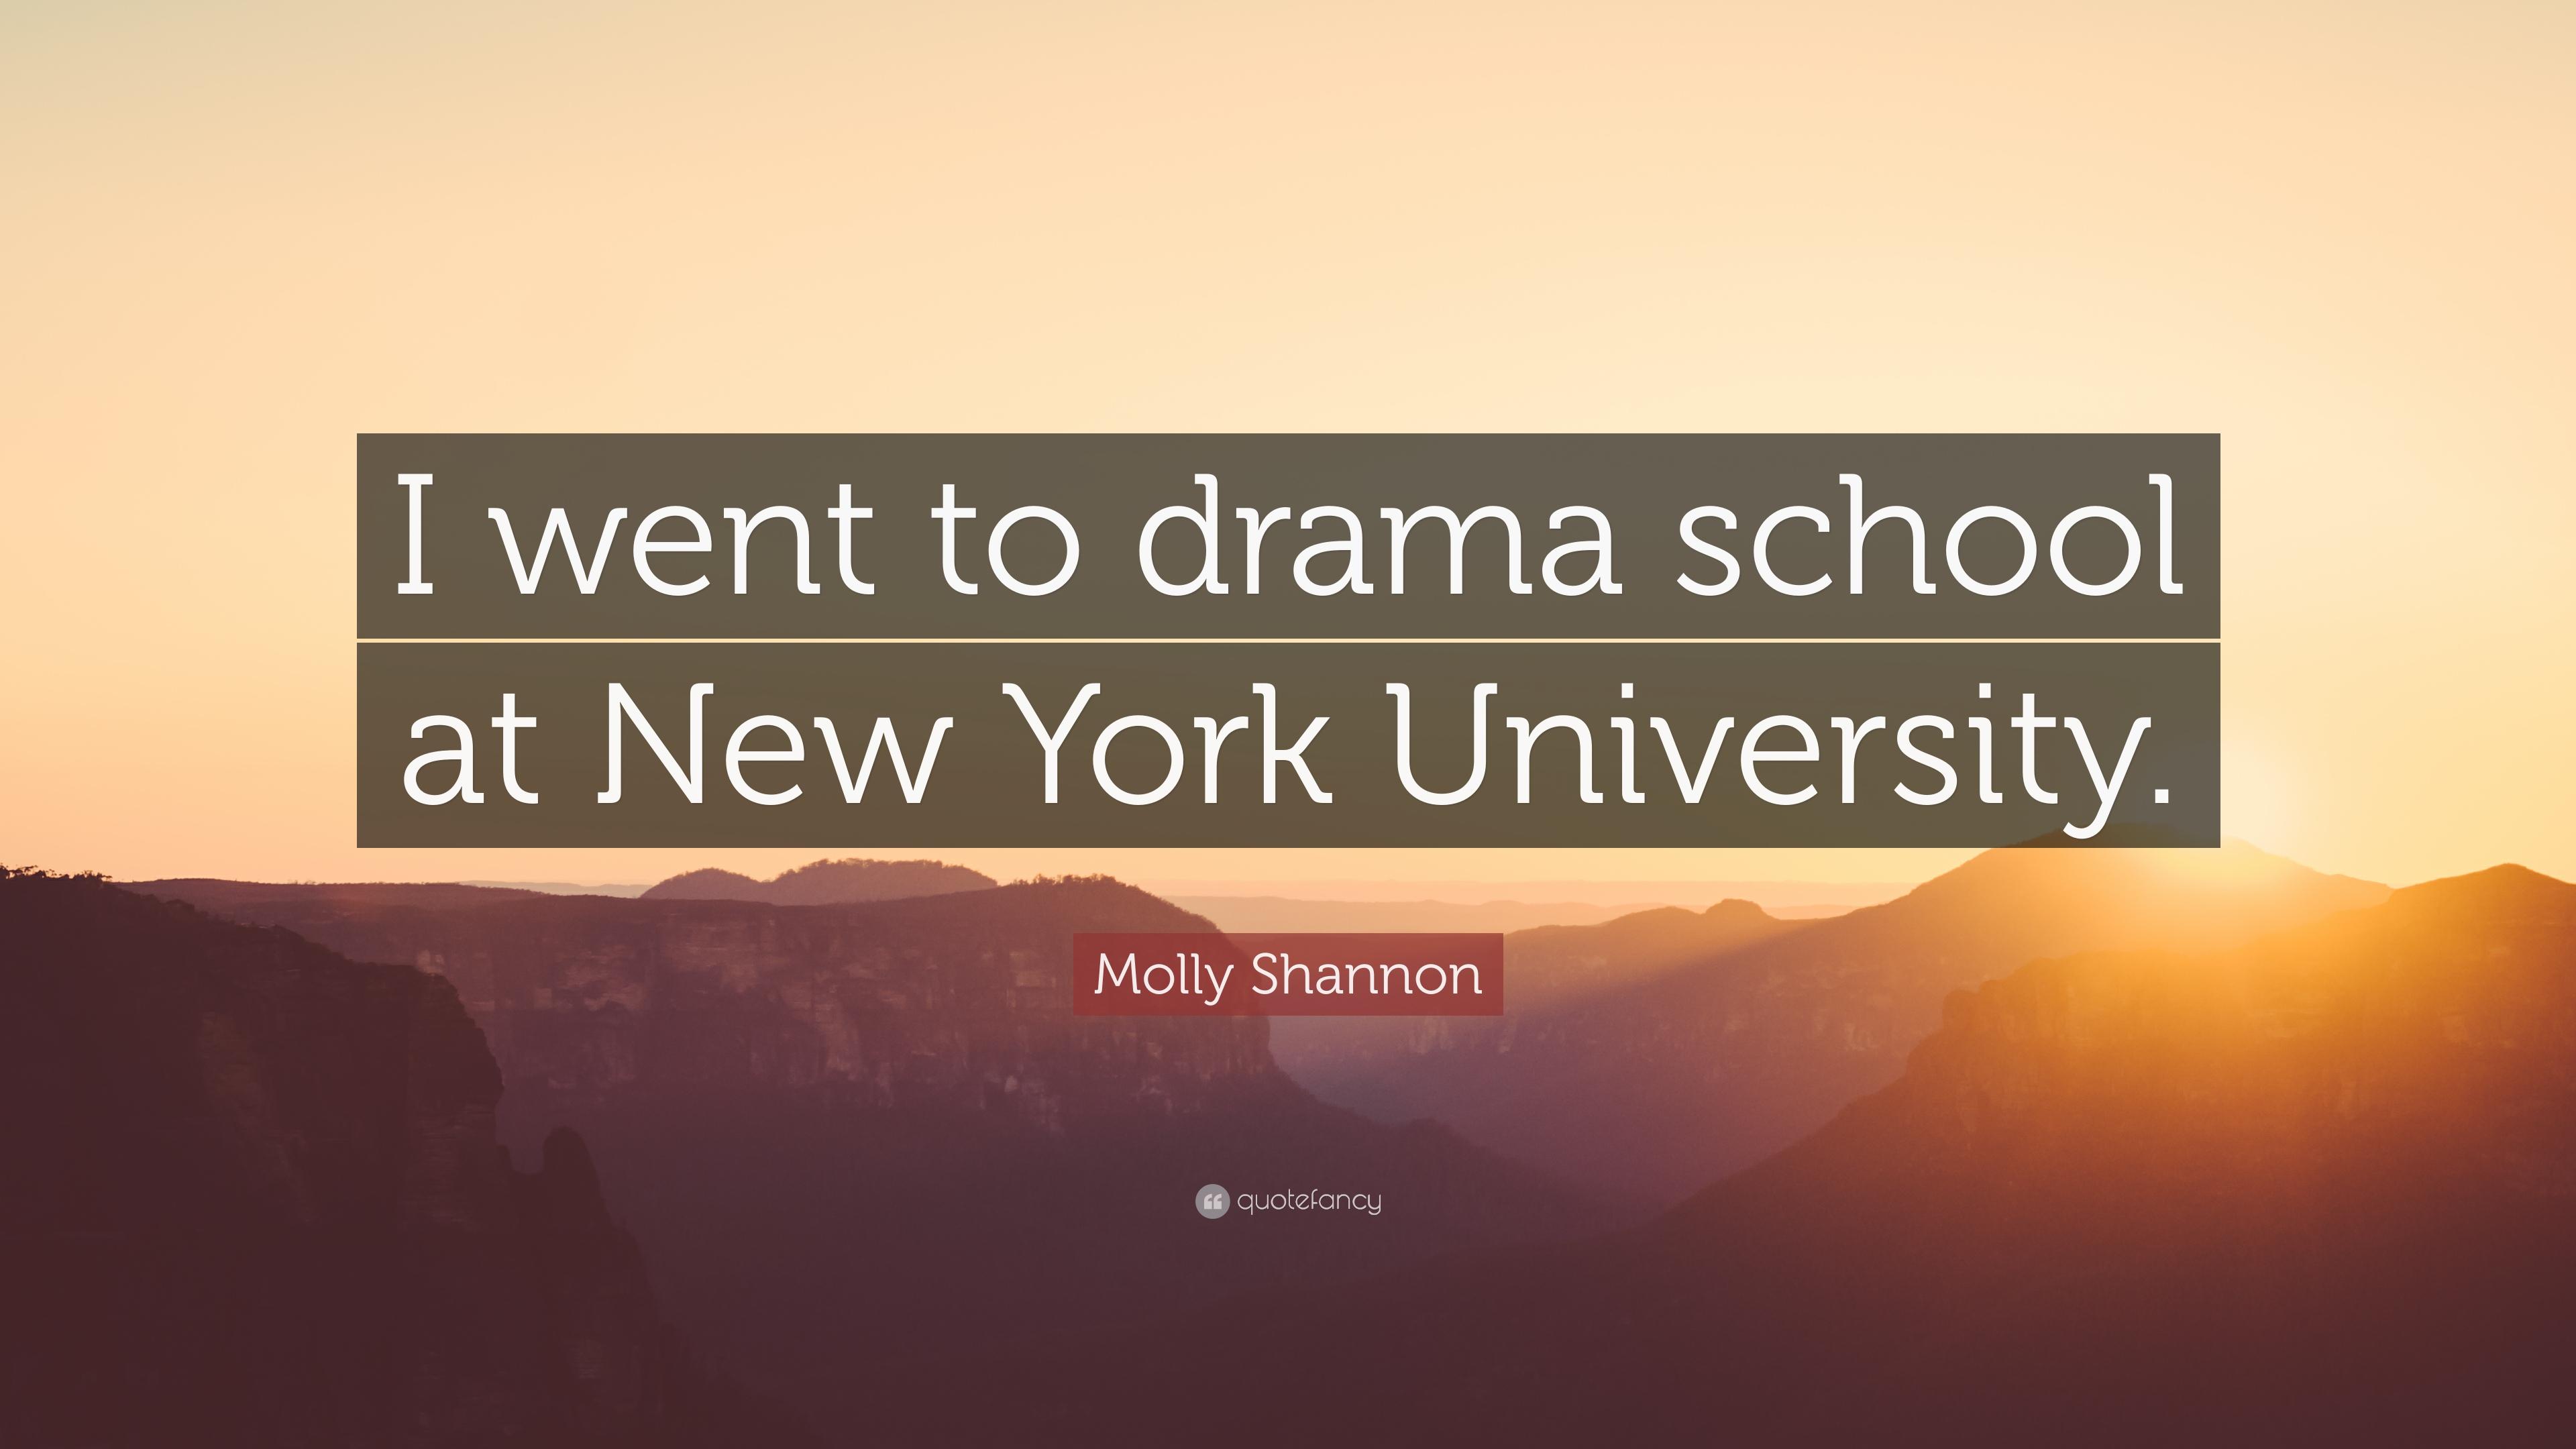 Molly Shannon Quote: “I went to drama school at New York University